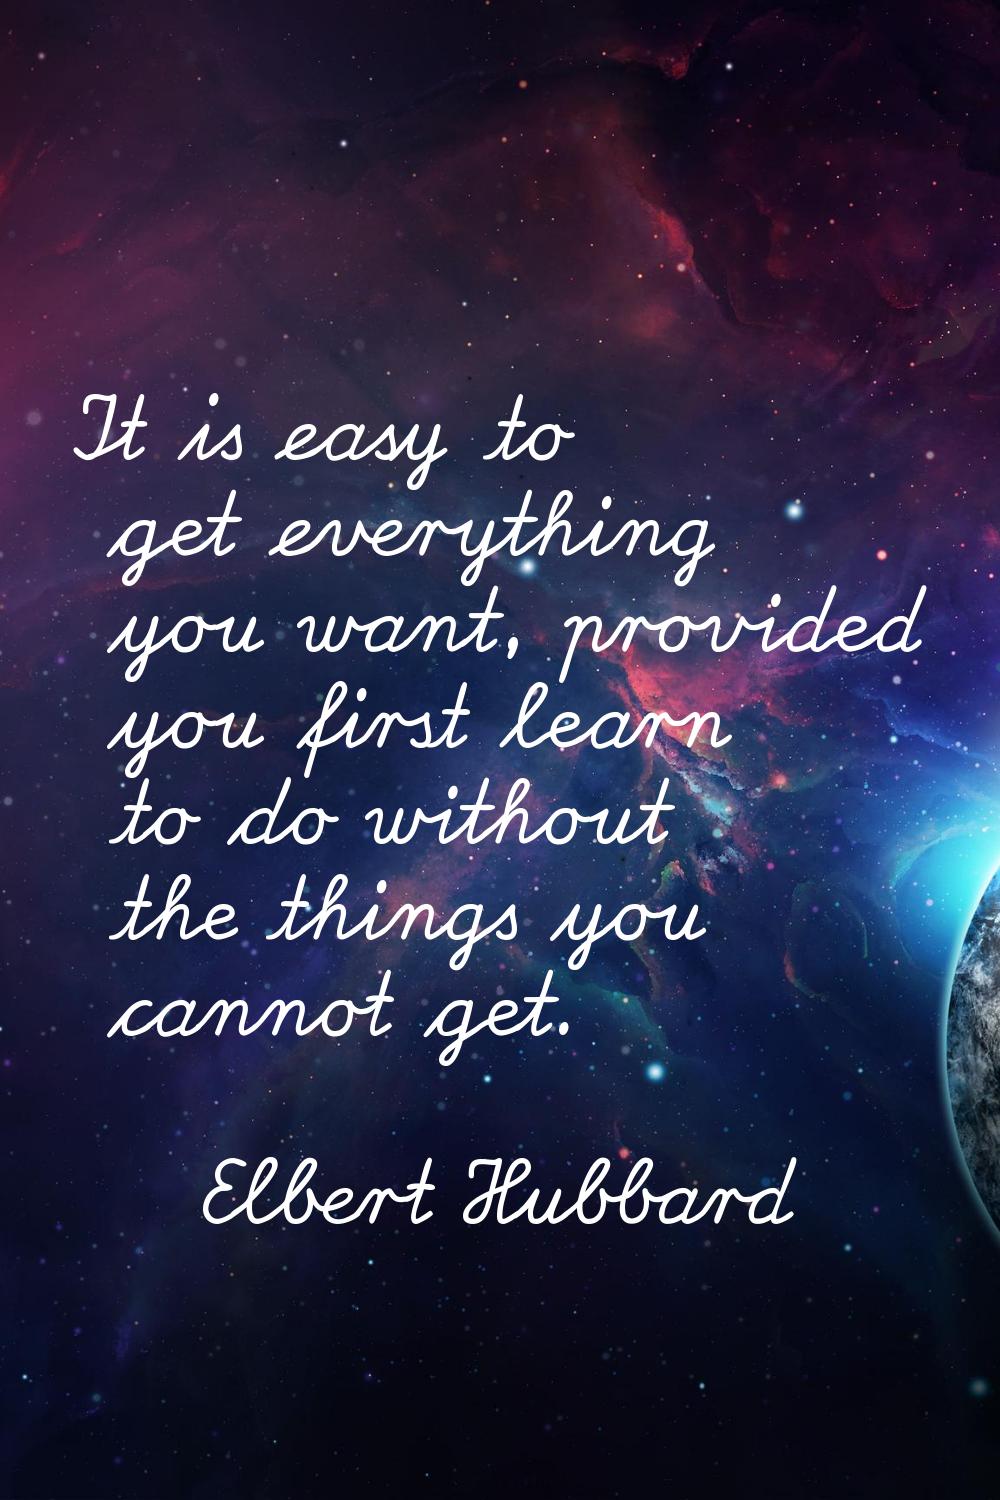 It is easy to get everything you want, provided you first learn to do without the things you cannot